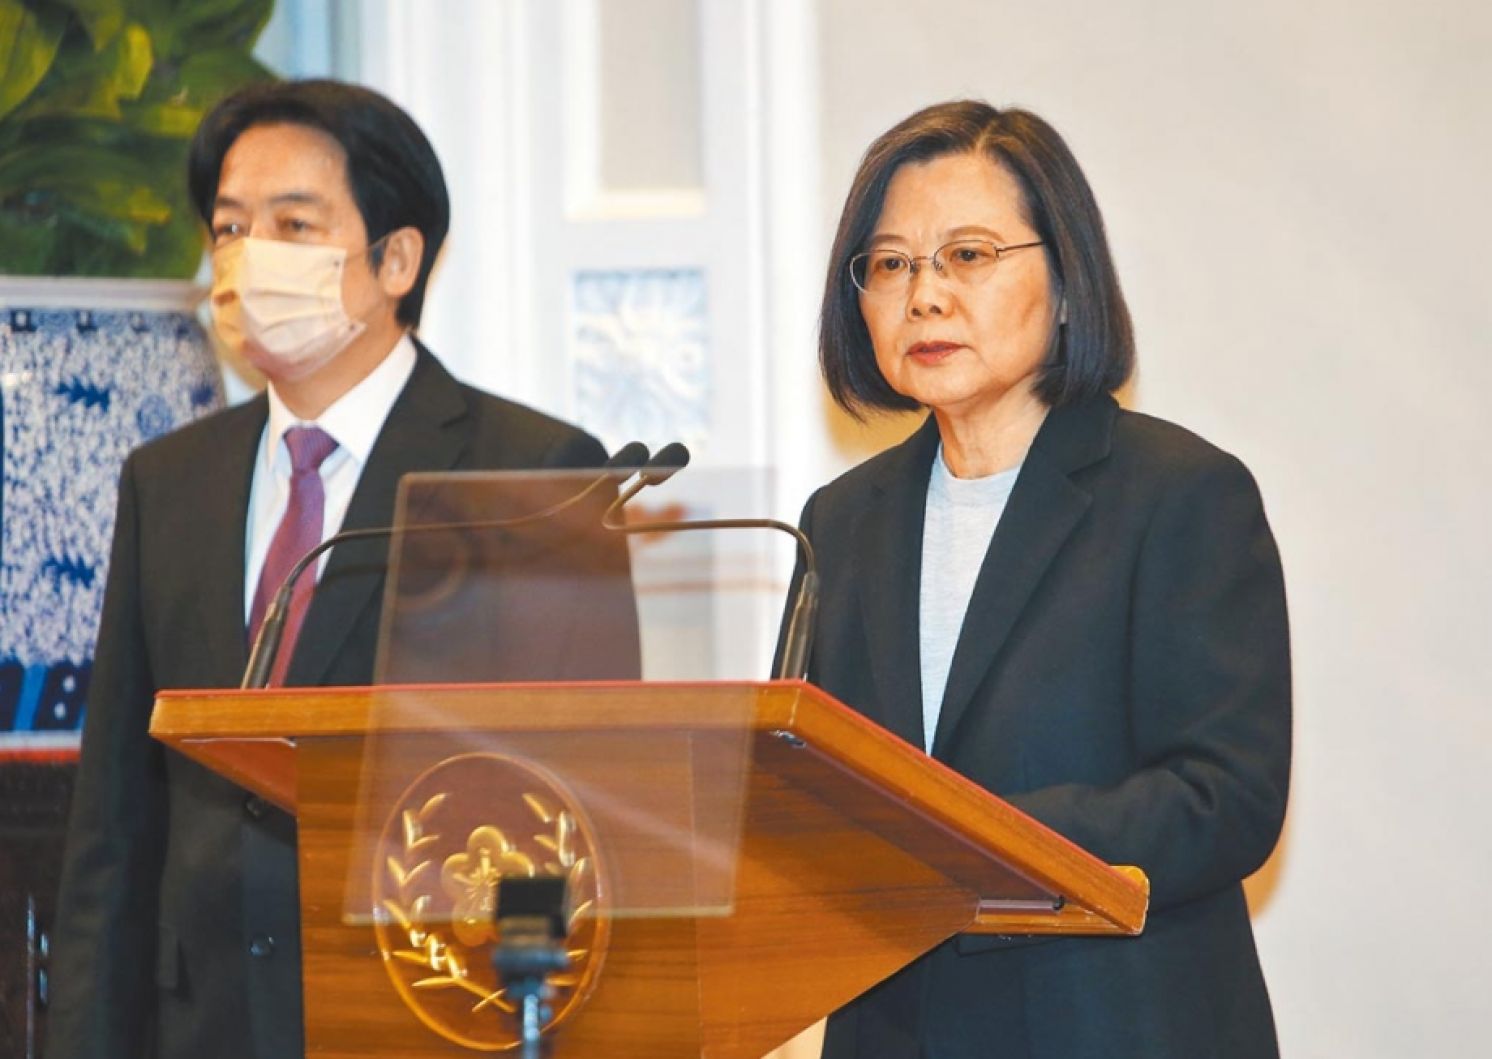 In New Year Address, President Tsai Calls Beijing to Reject Military Adventurism, Use of Force